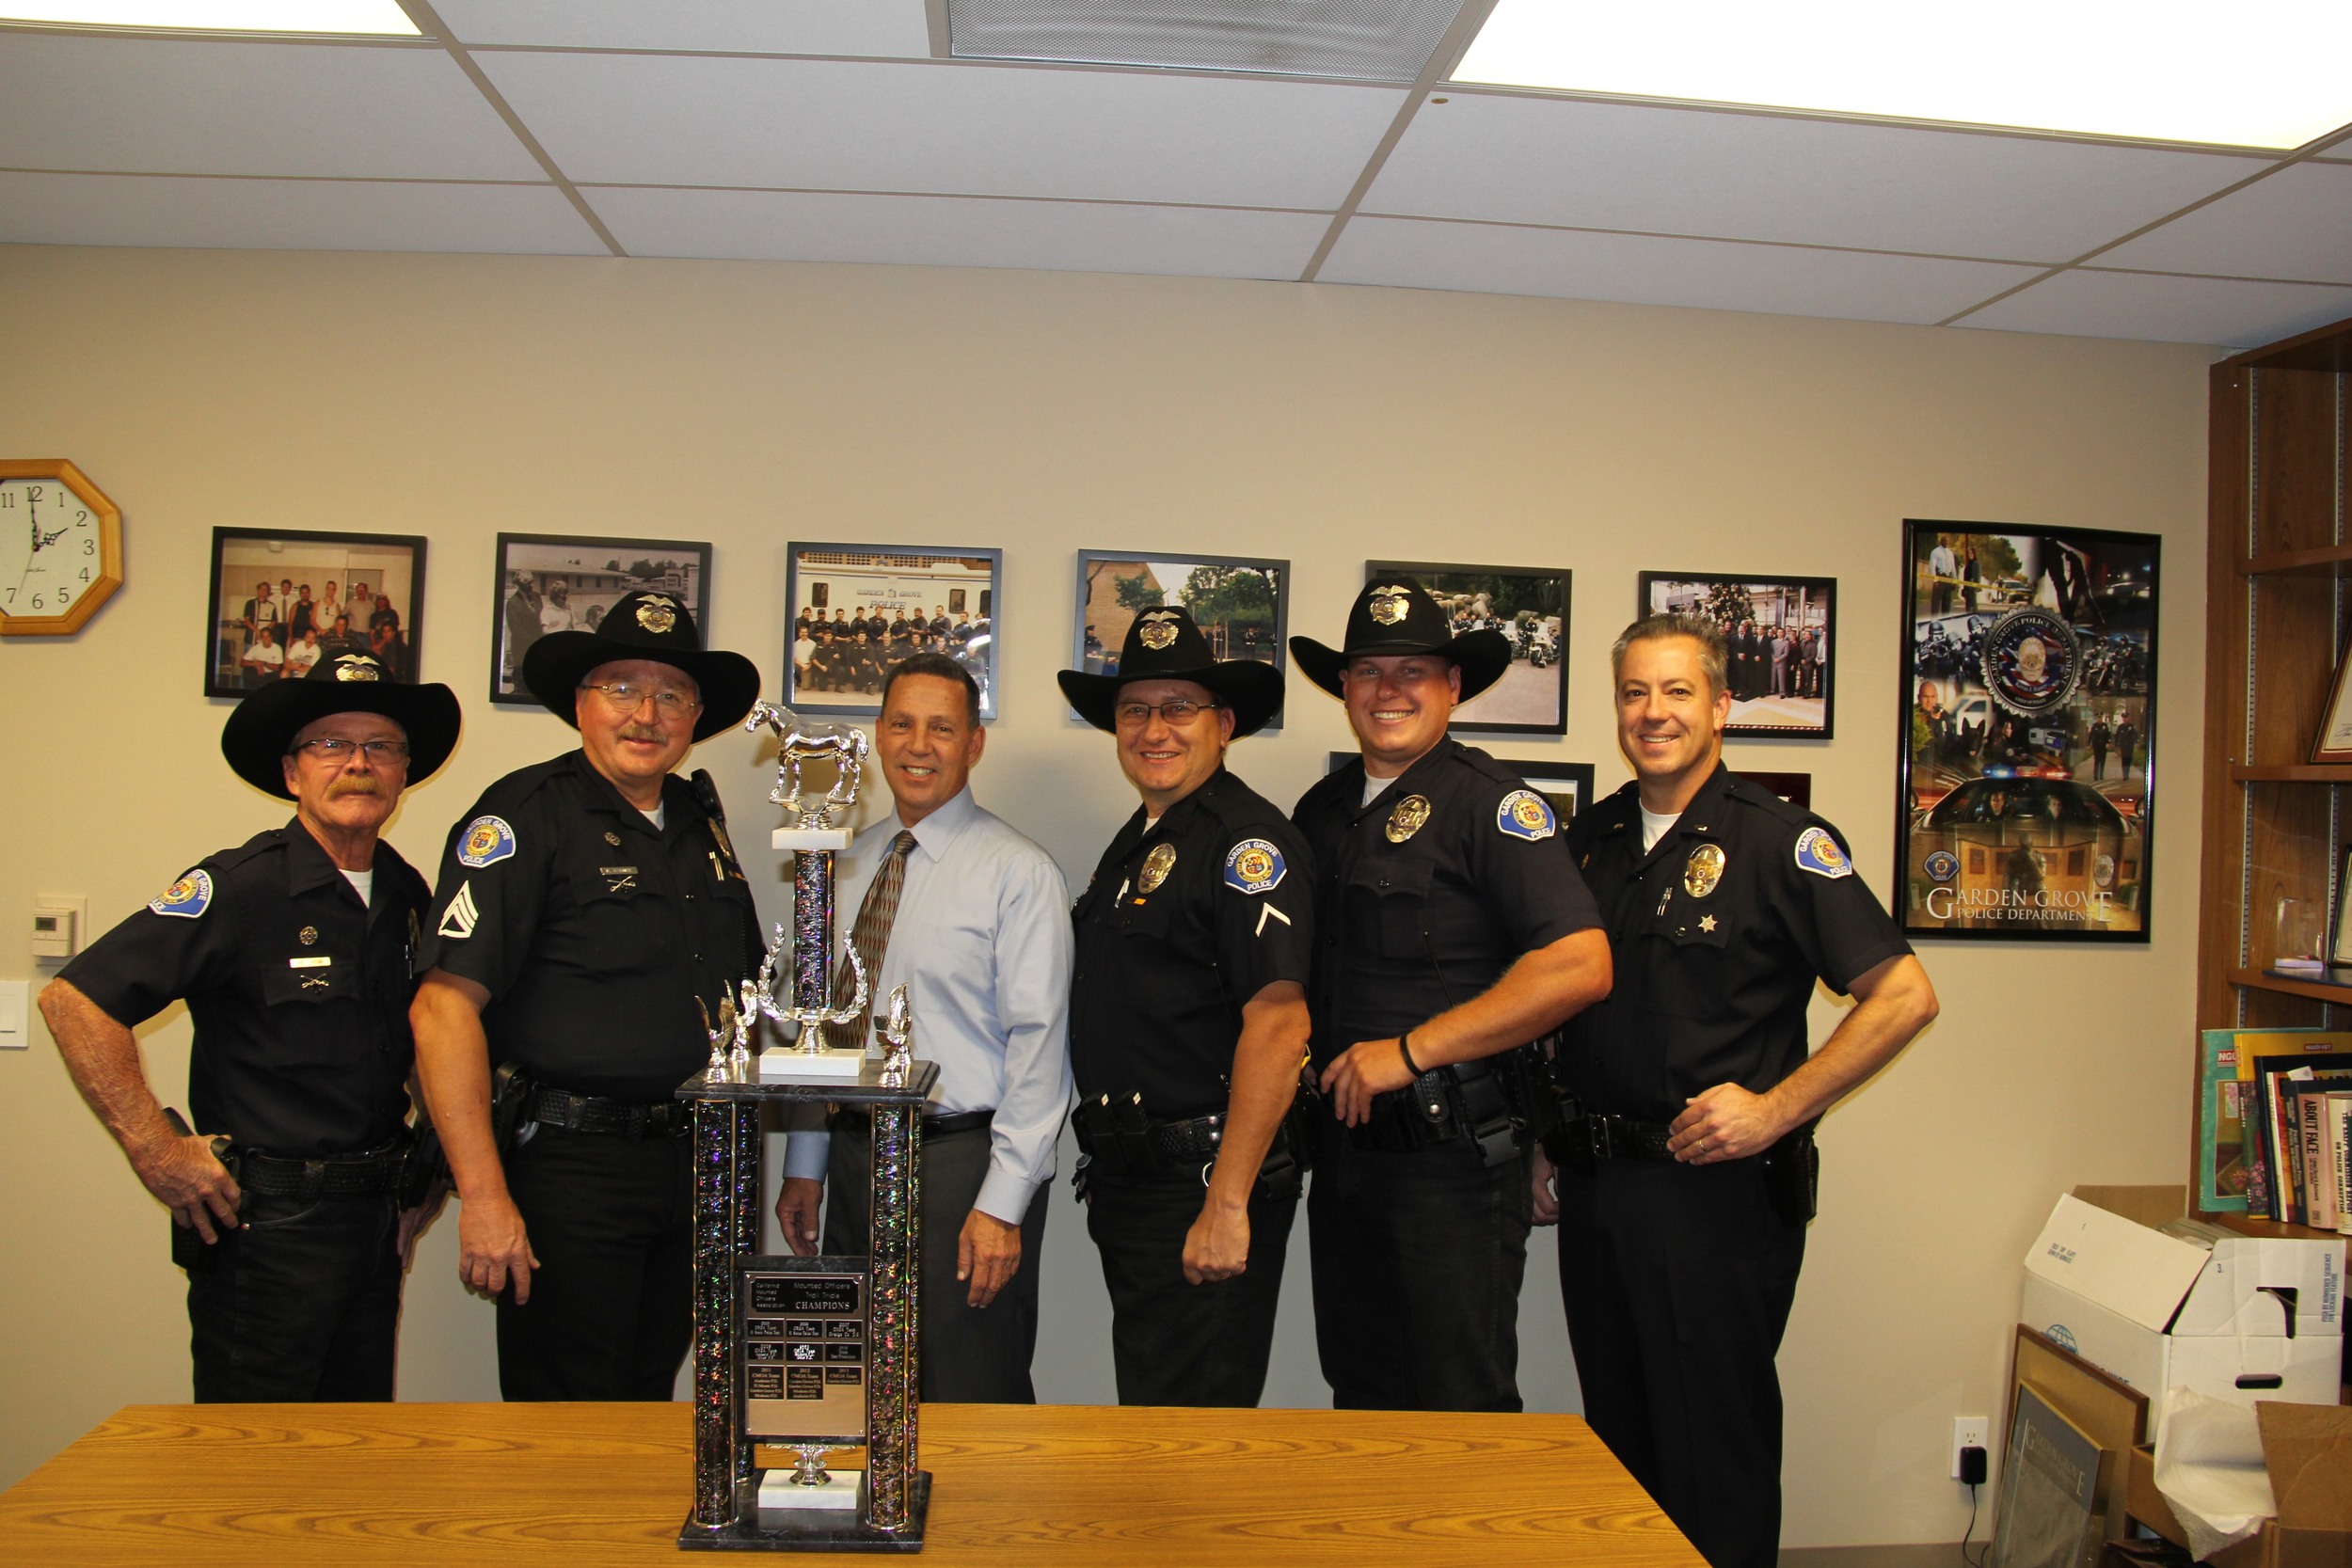 The Garden Grove team presents the trophy to Chief Kevin Raney